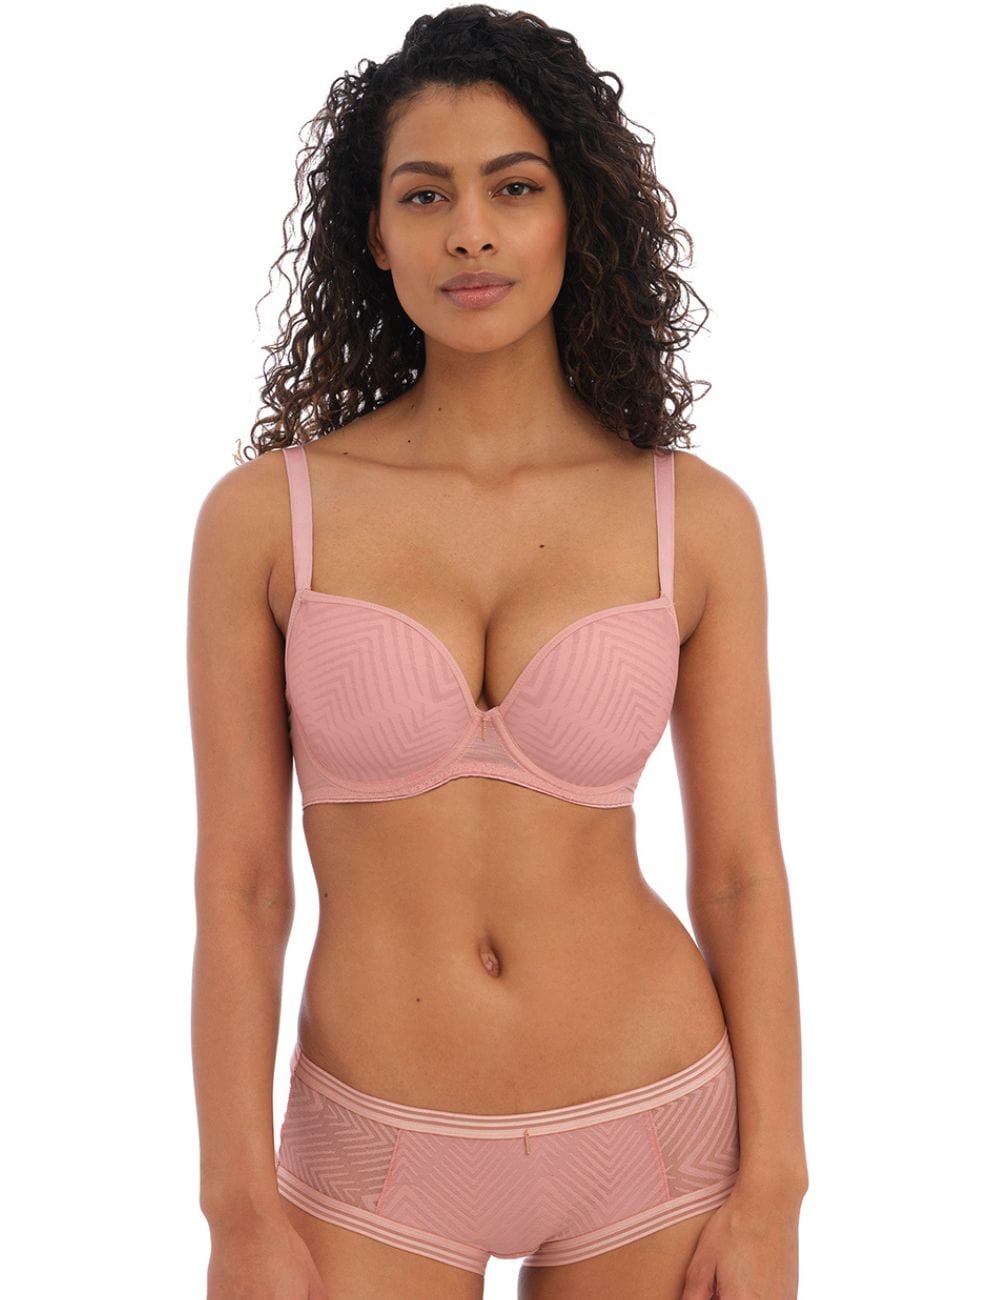 Offbeat Natural Beige Moulded Bra from Freya